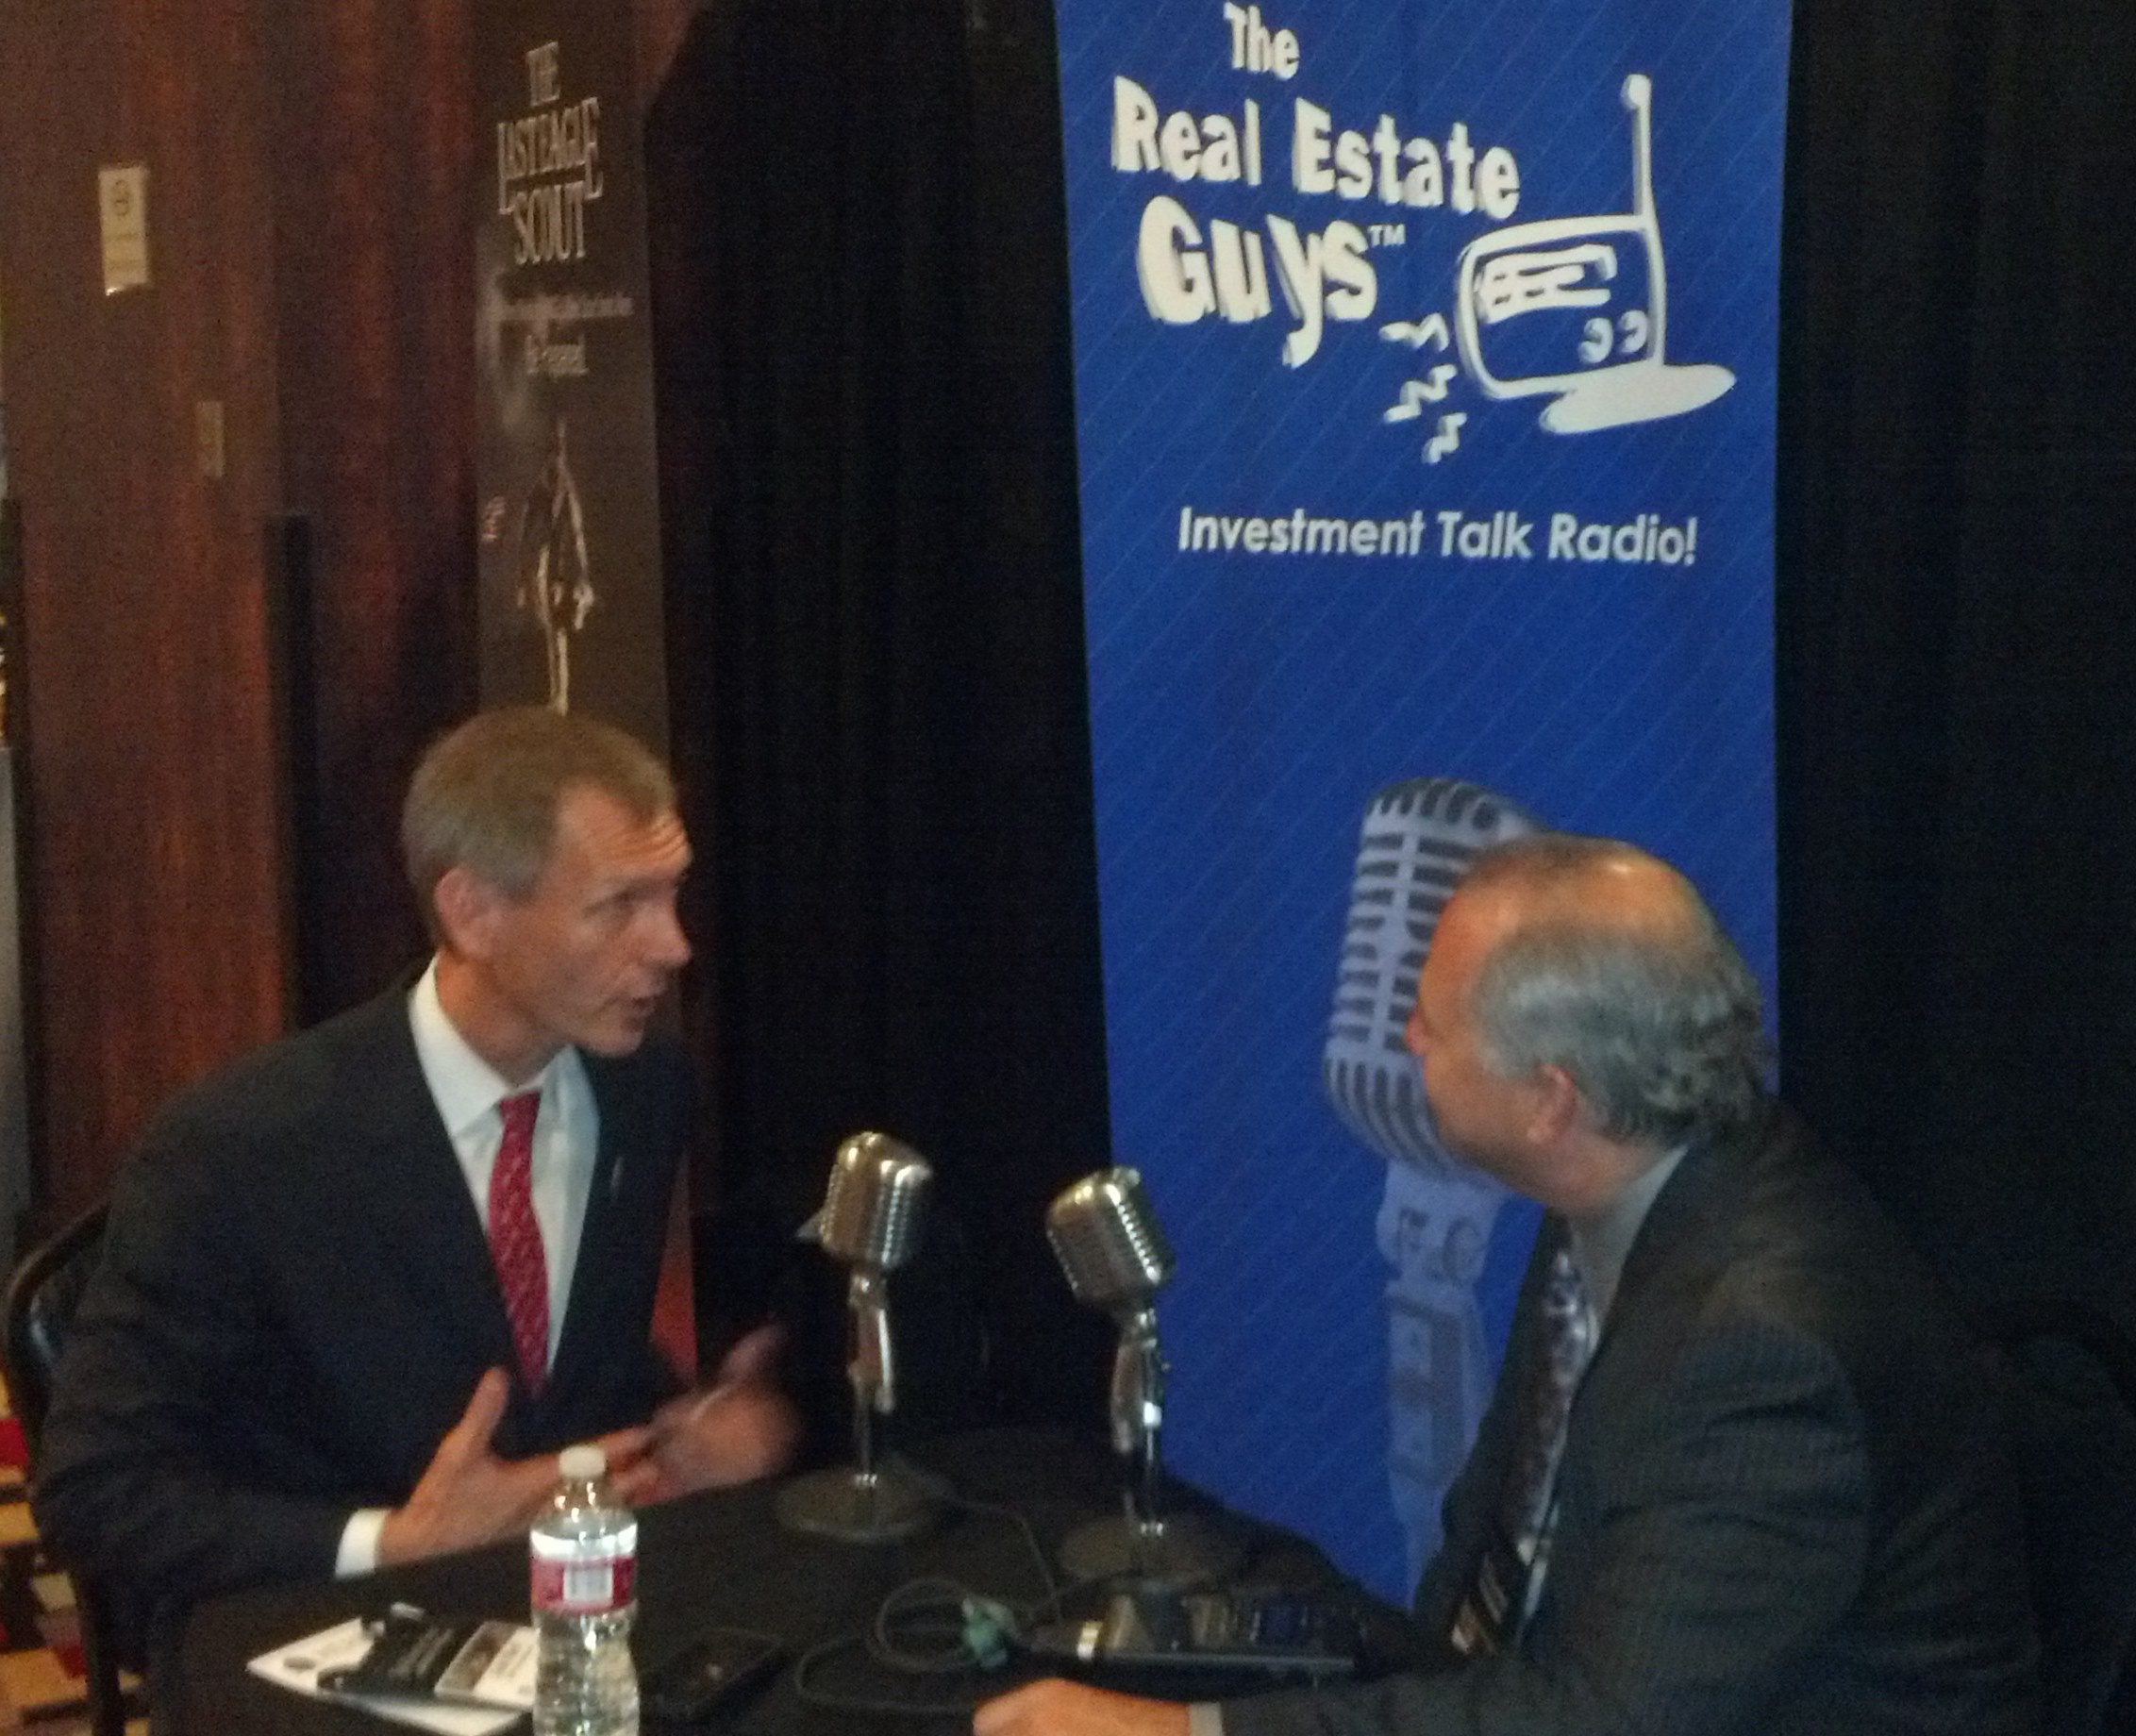 Axel Merk is intereviewed at Freedom Fest by The Real Estate Guys host Robert Helms